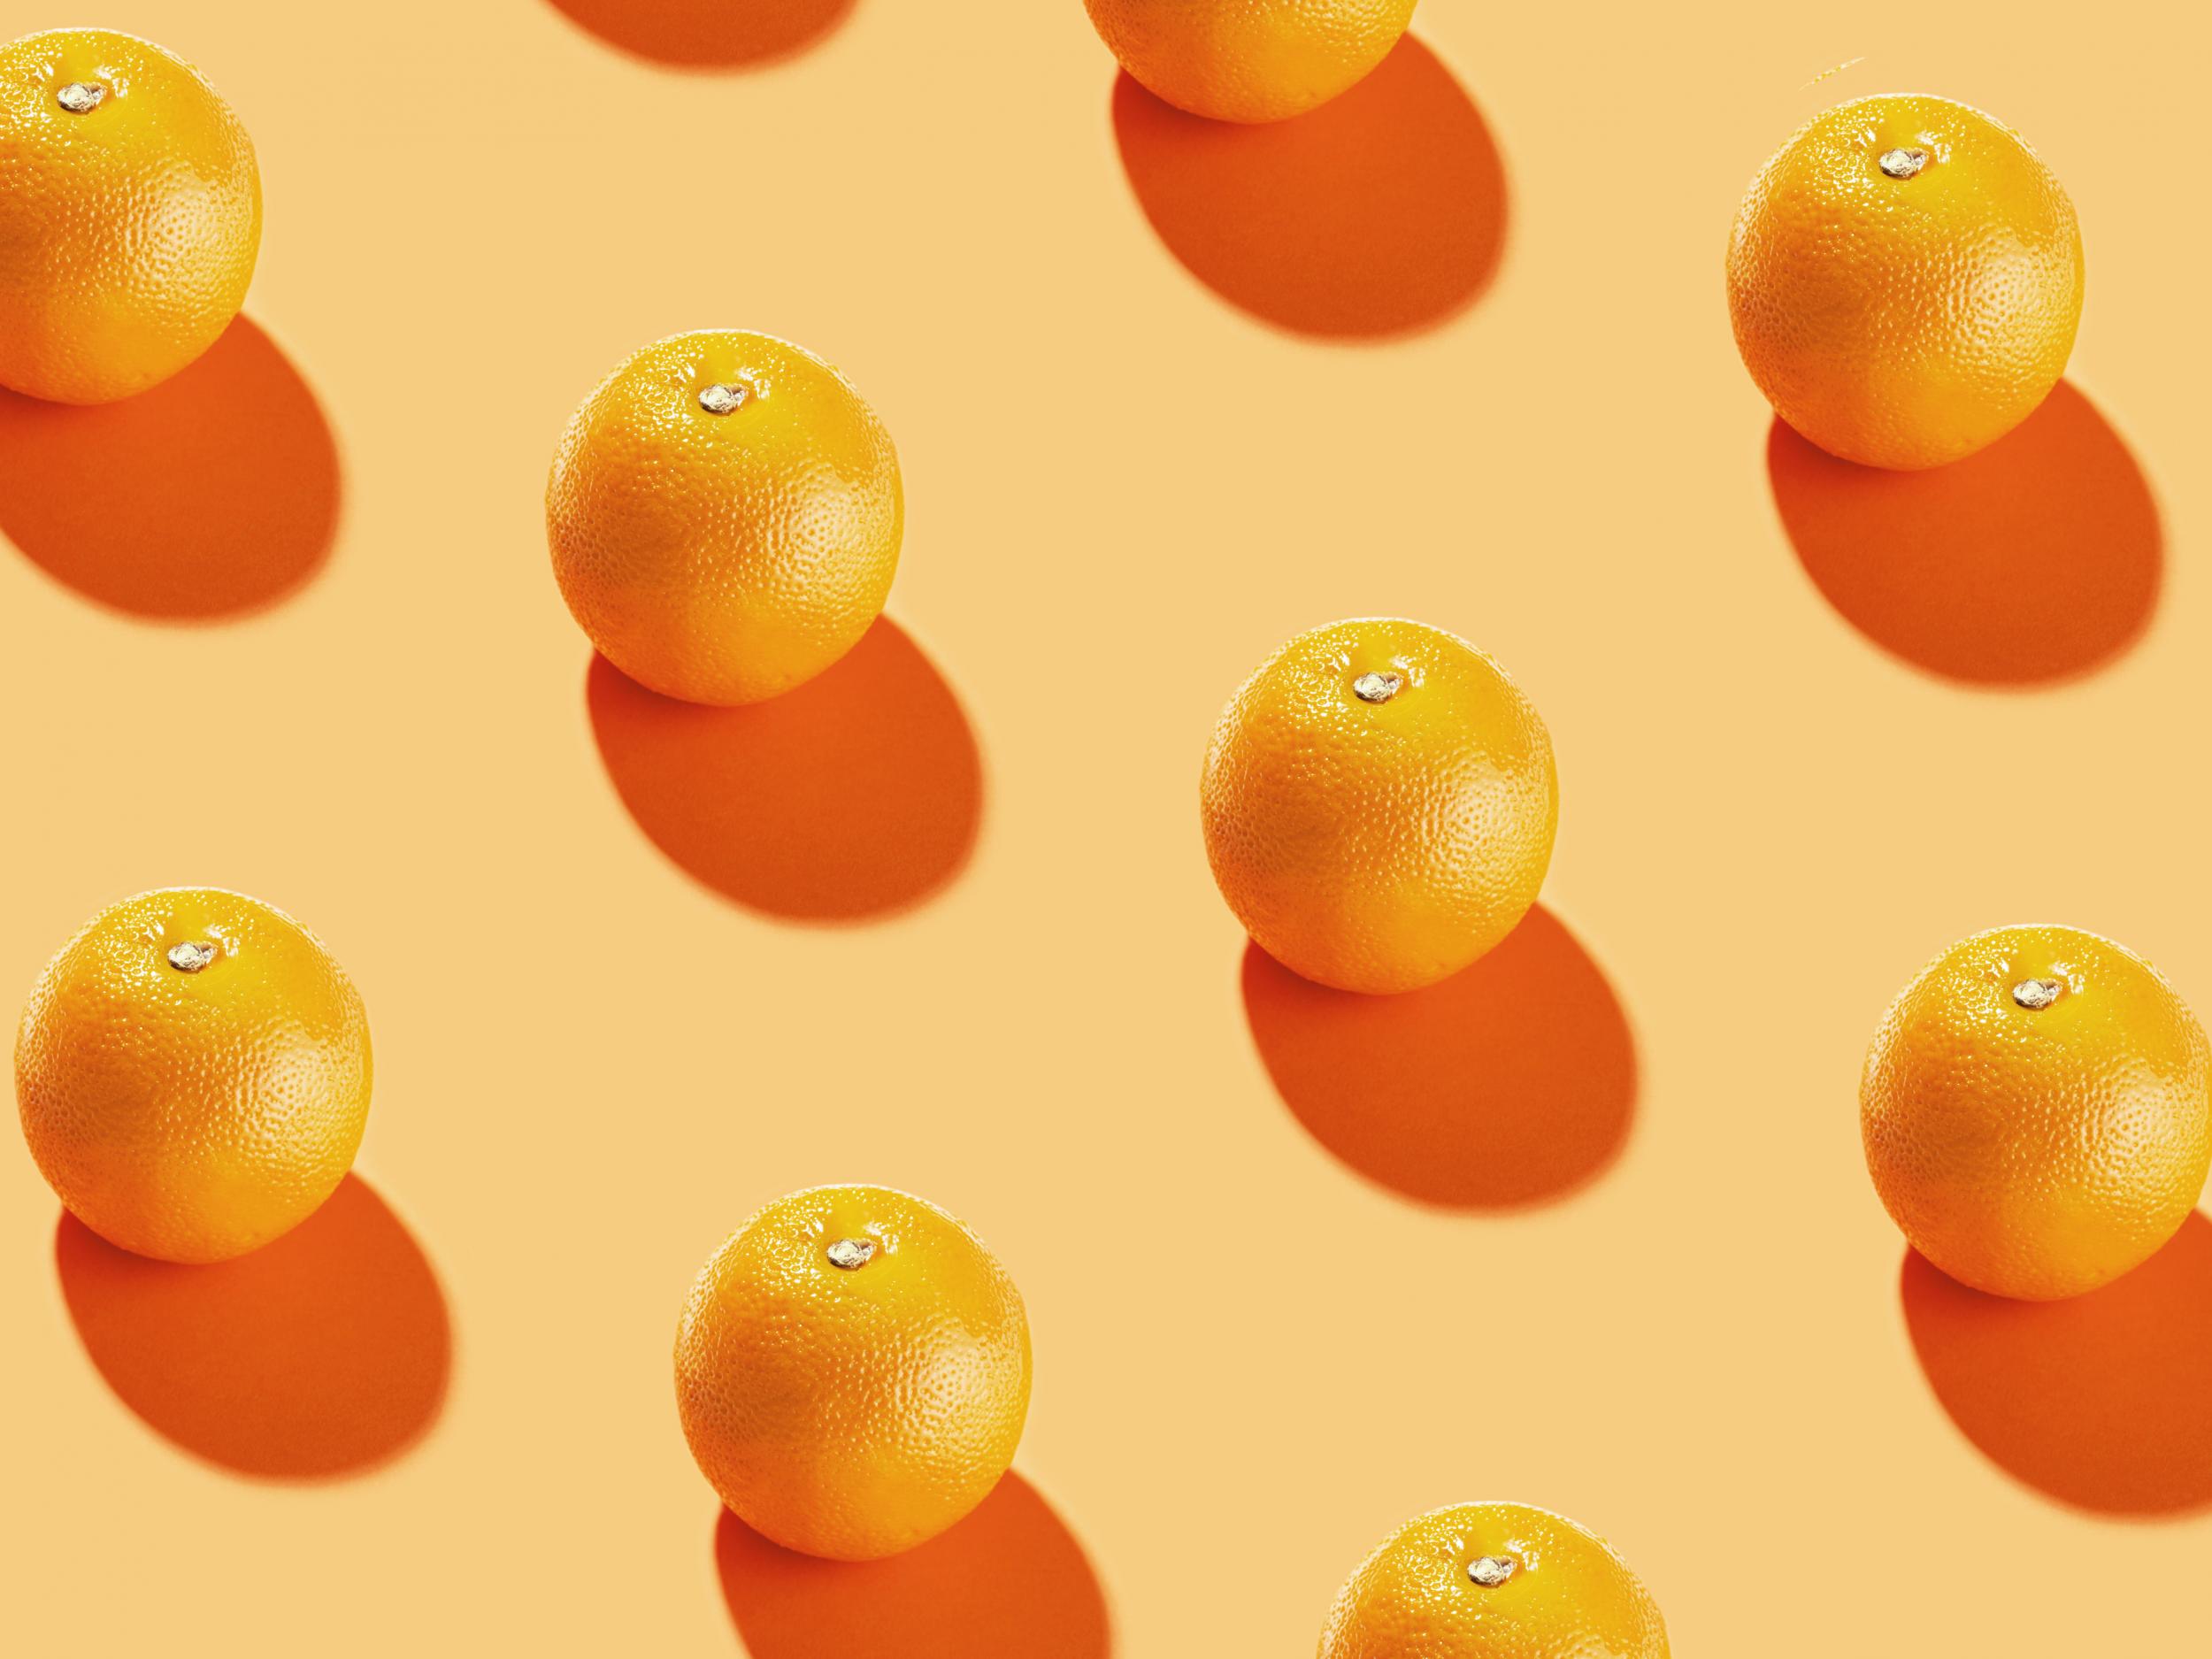 A gold-standard anti-ageing ingredient, vitamin C also works to brighten the skin and to reduce pigmentation